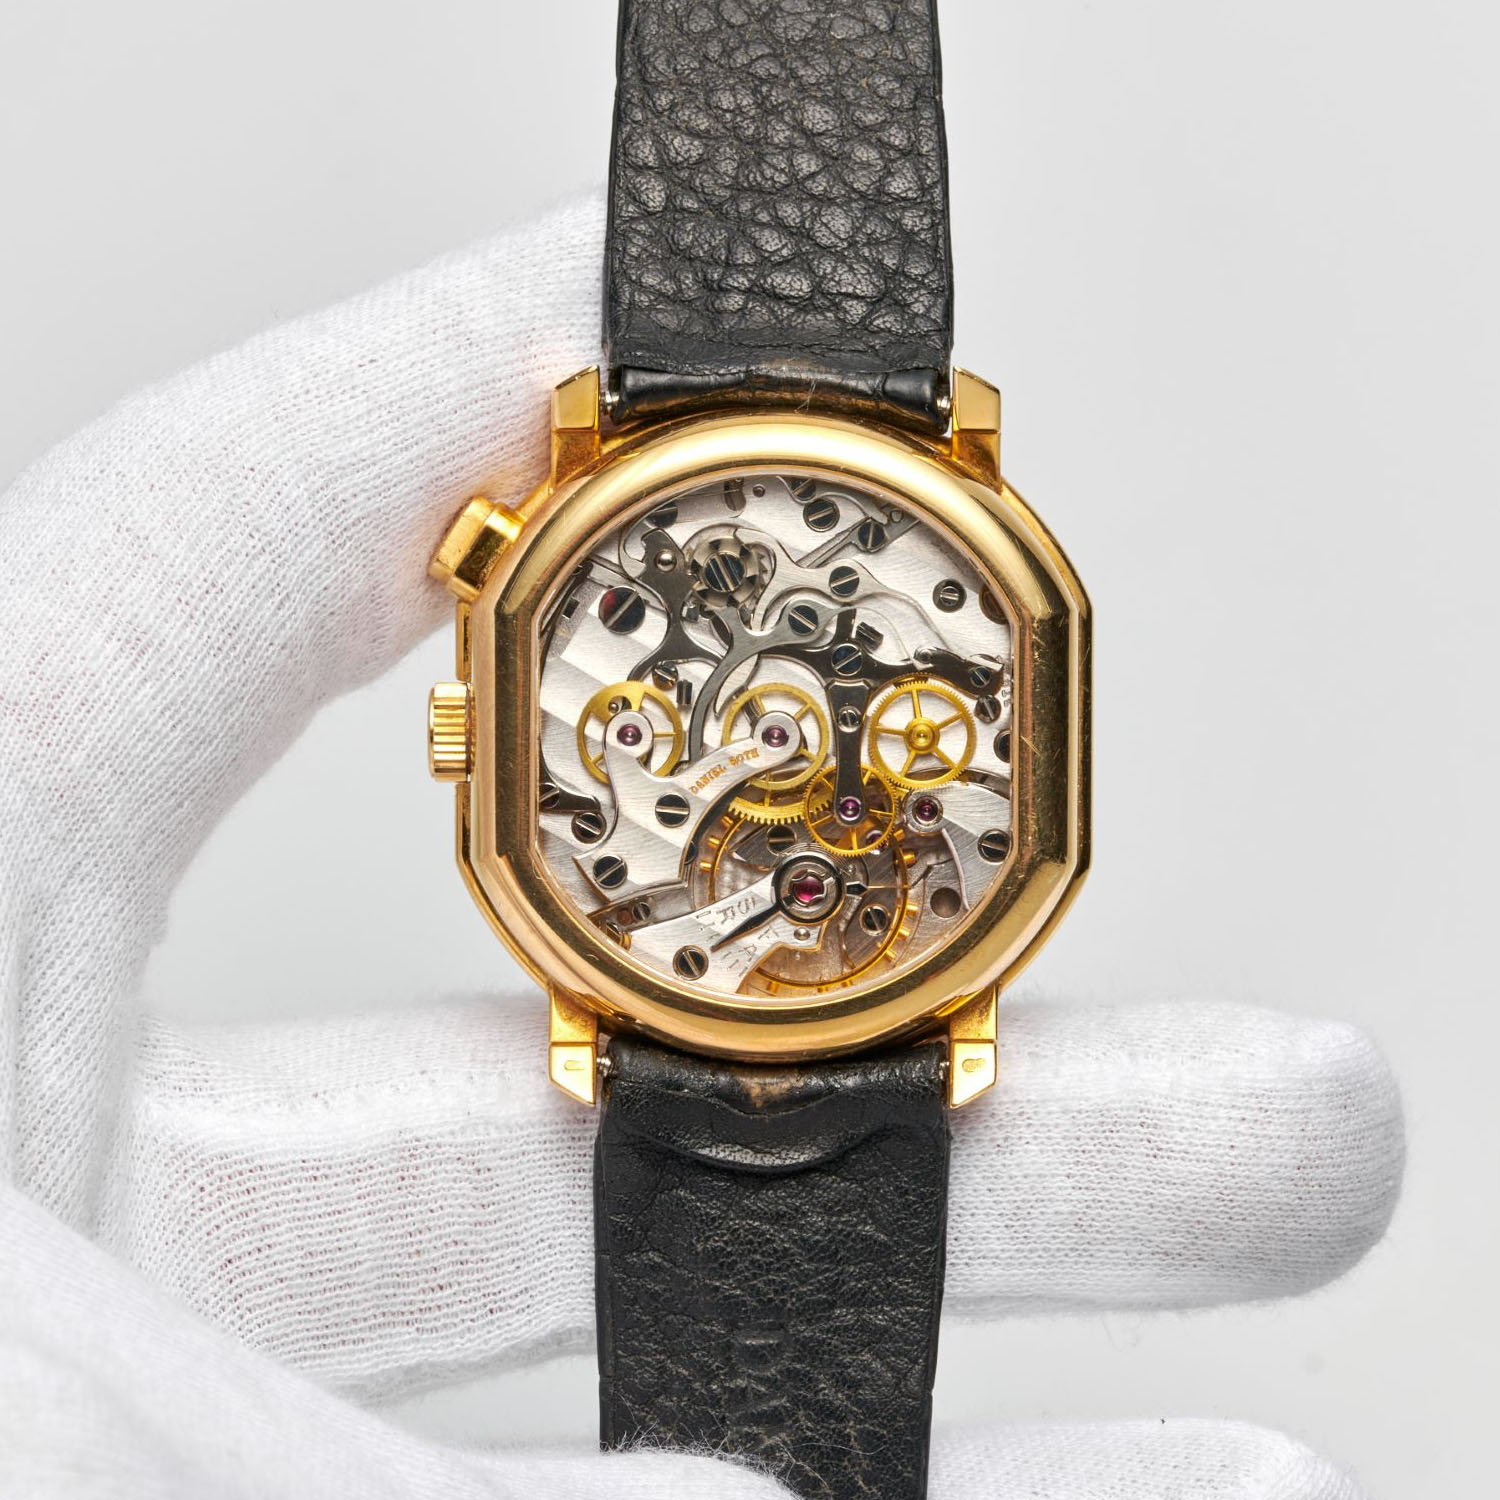 Daniel Roth Monopusher Chronograph C137 - Ineichen Independent Watchmaker Auction Geneva May 2023 - 2